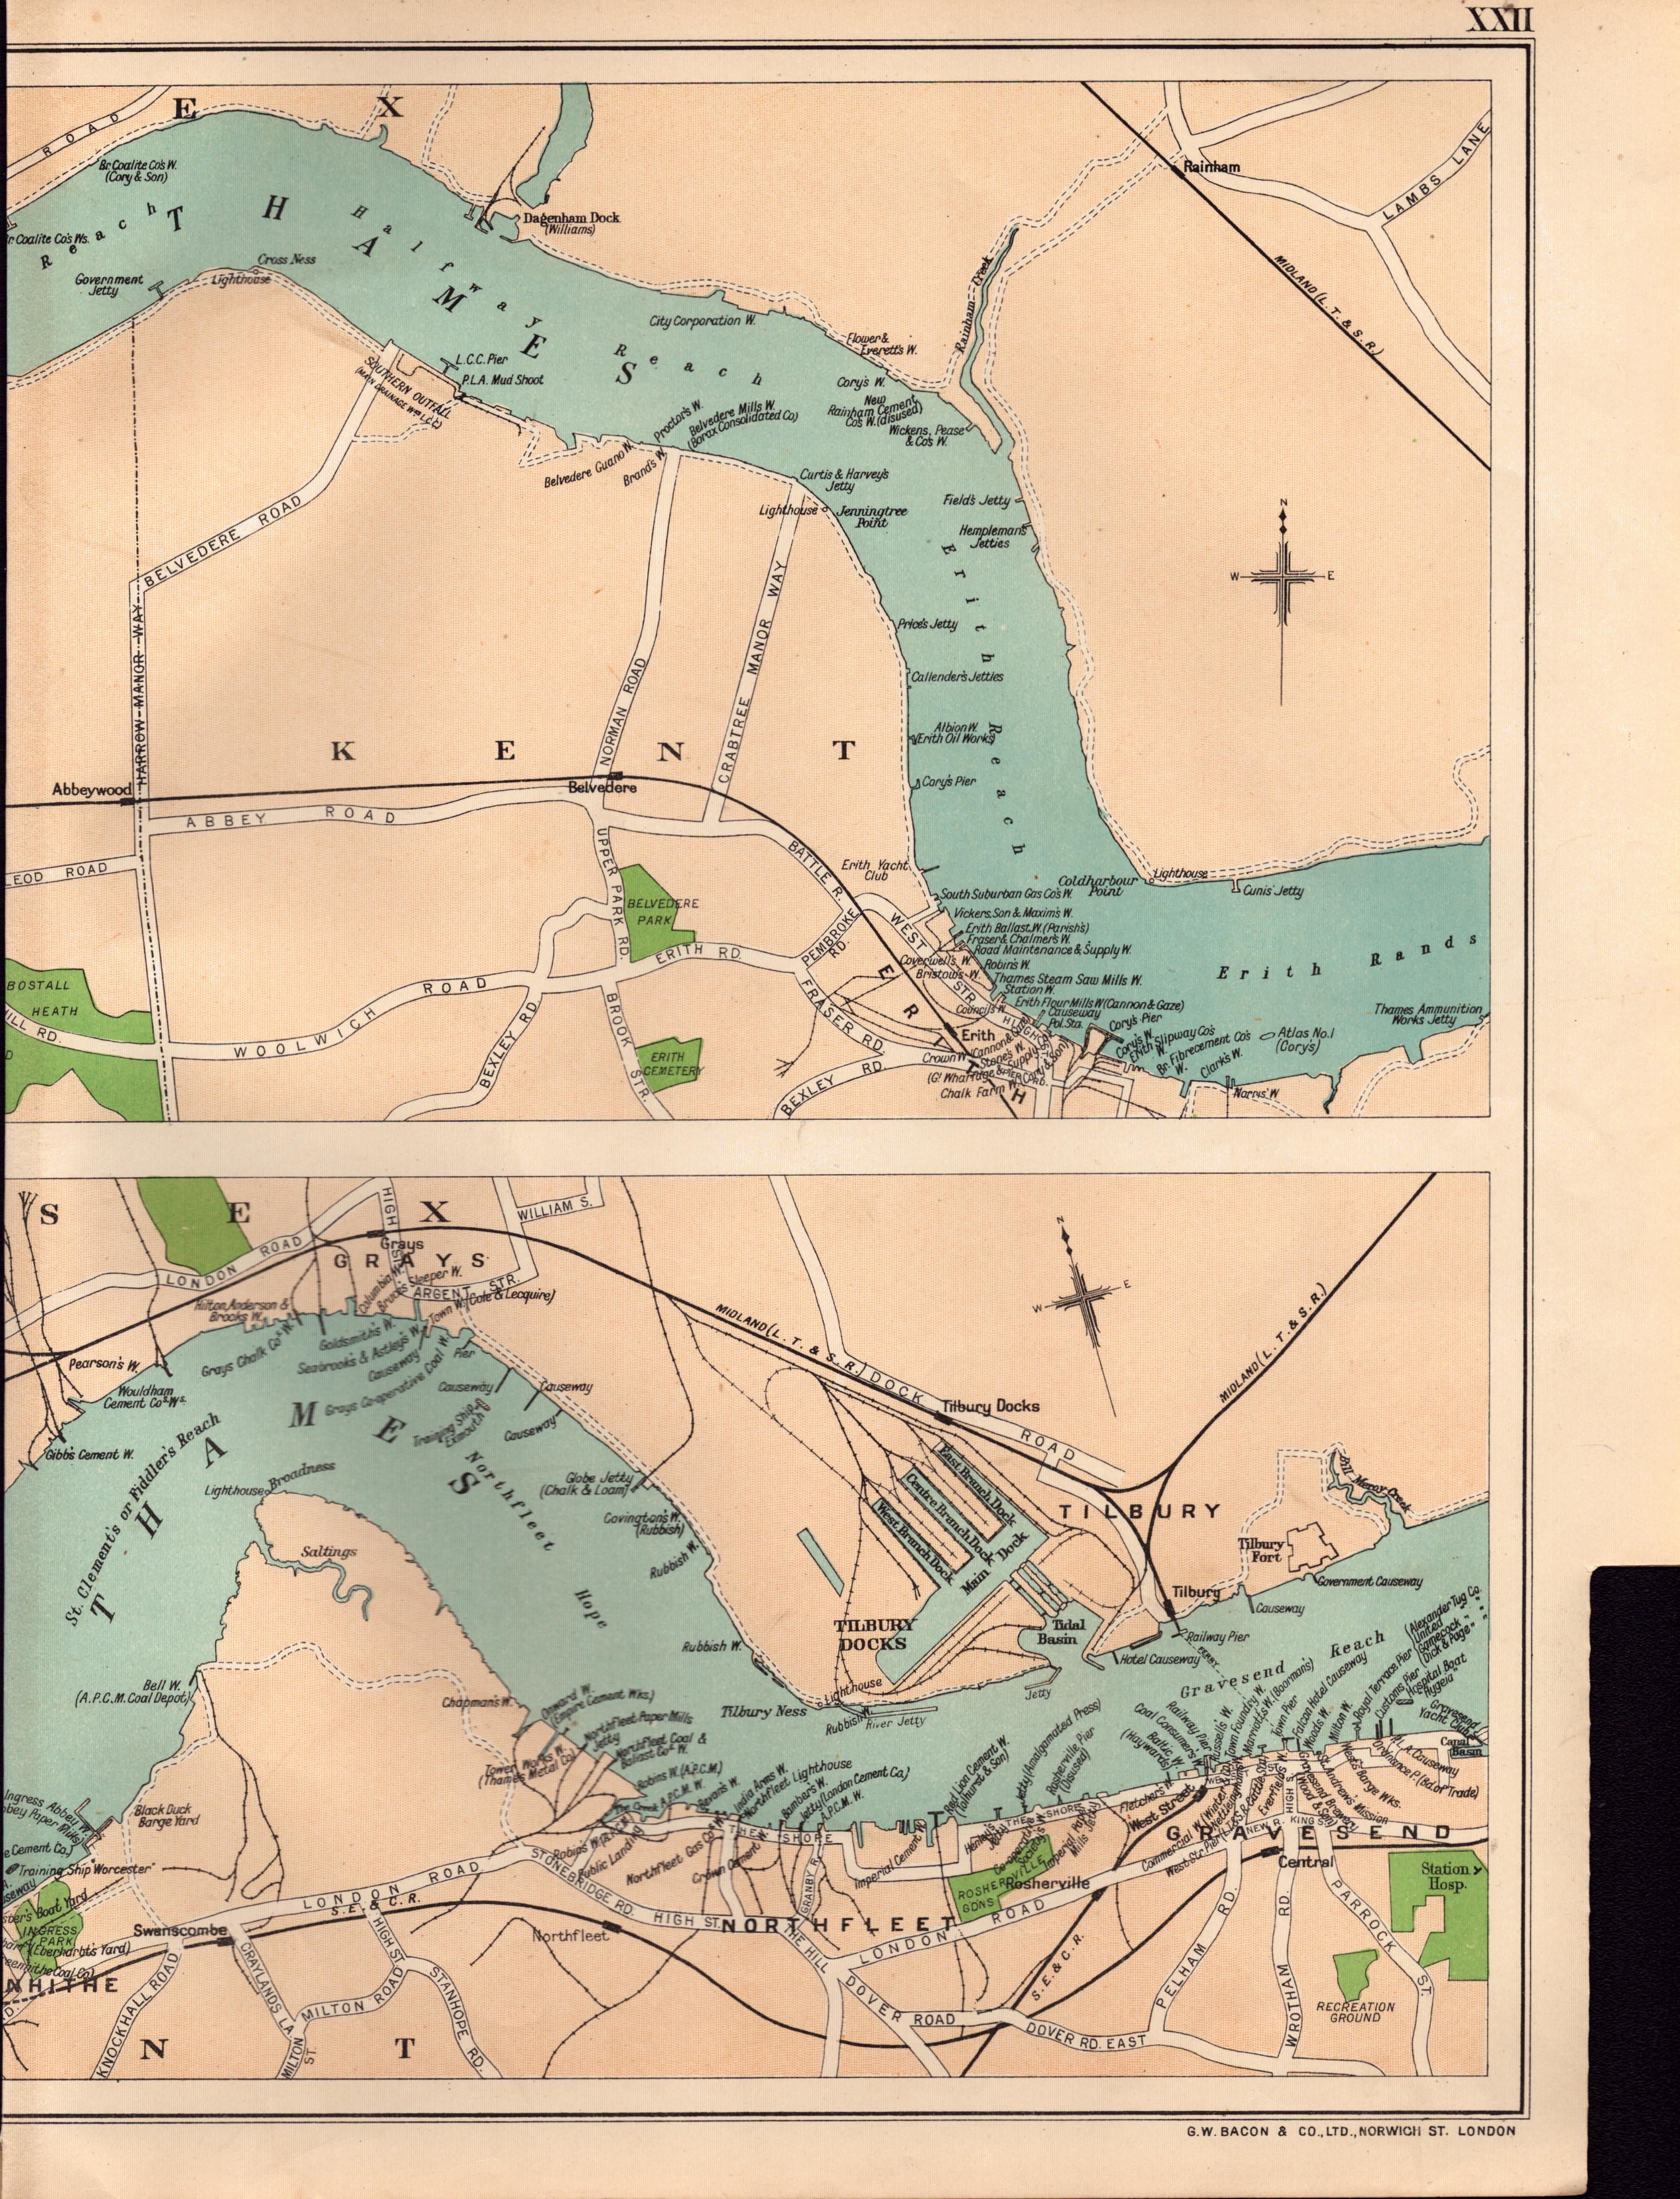 Bacons Vintage London Suburbs the River Thames Showing Wharves Map. - Image 3 of 4